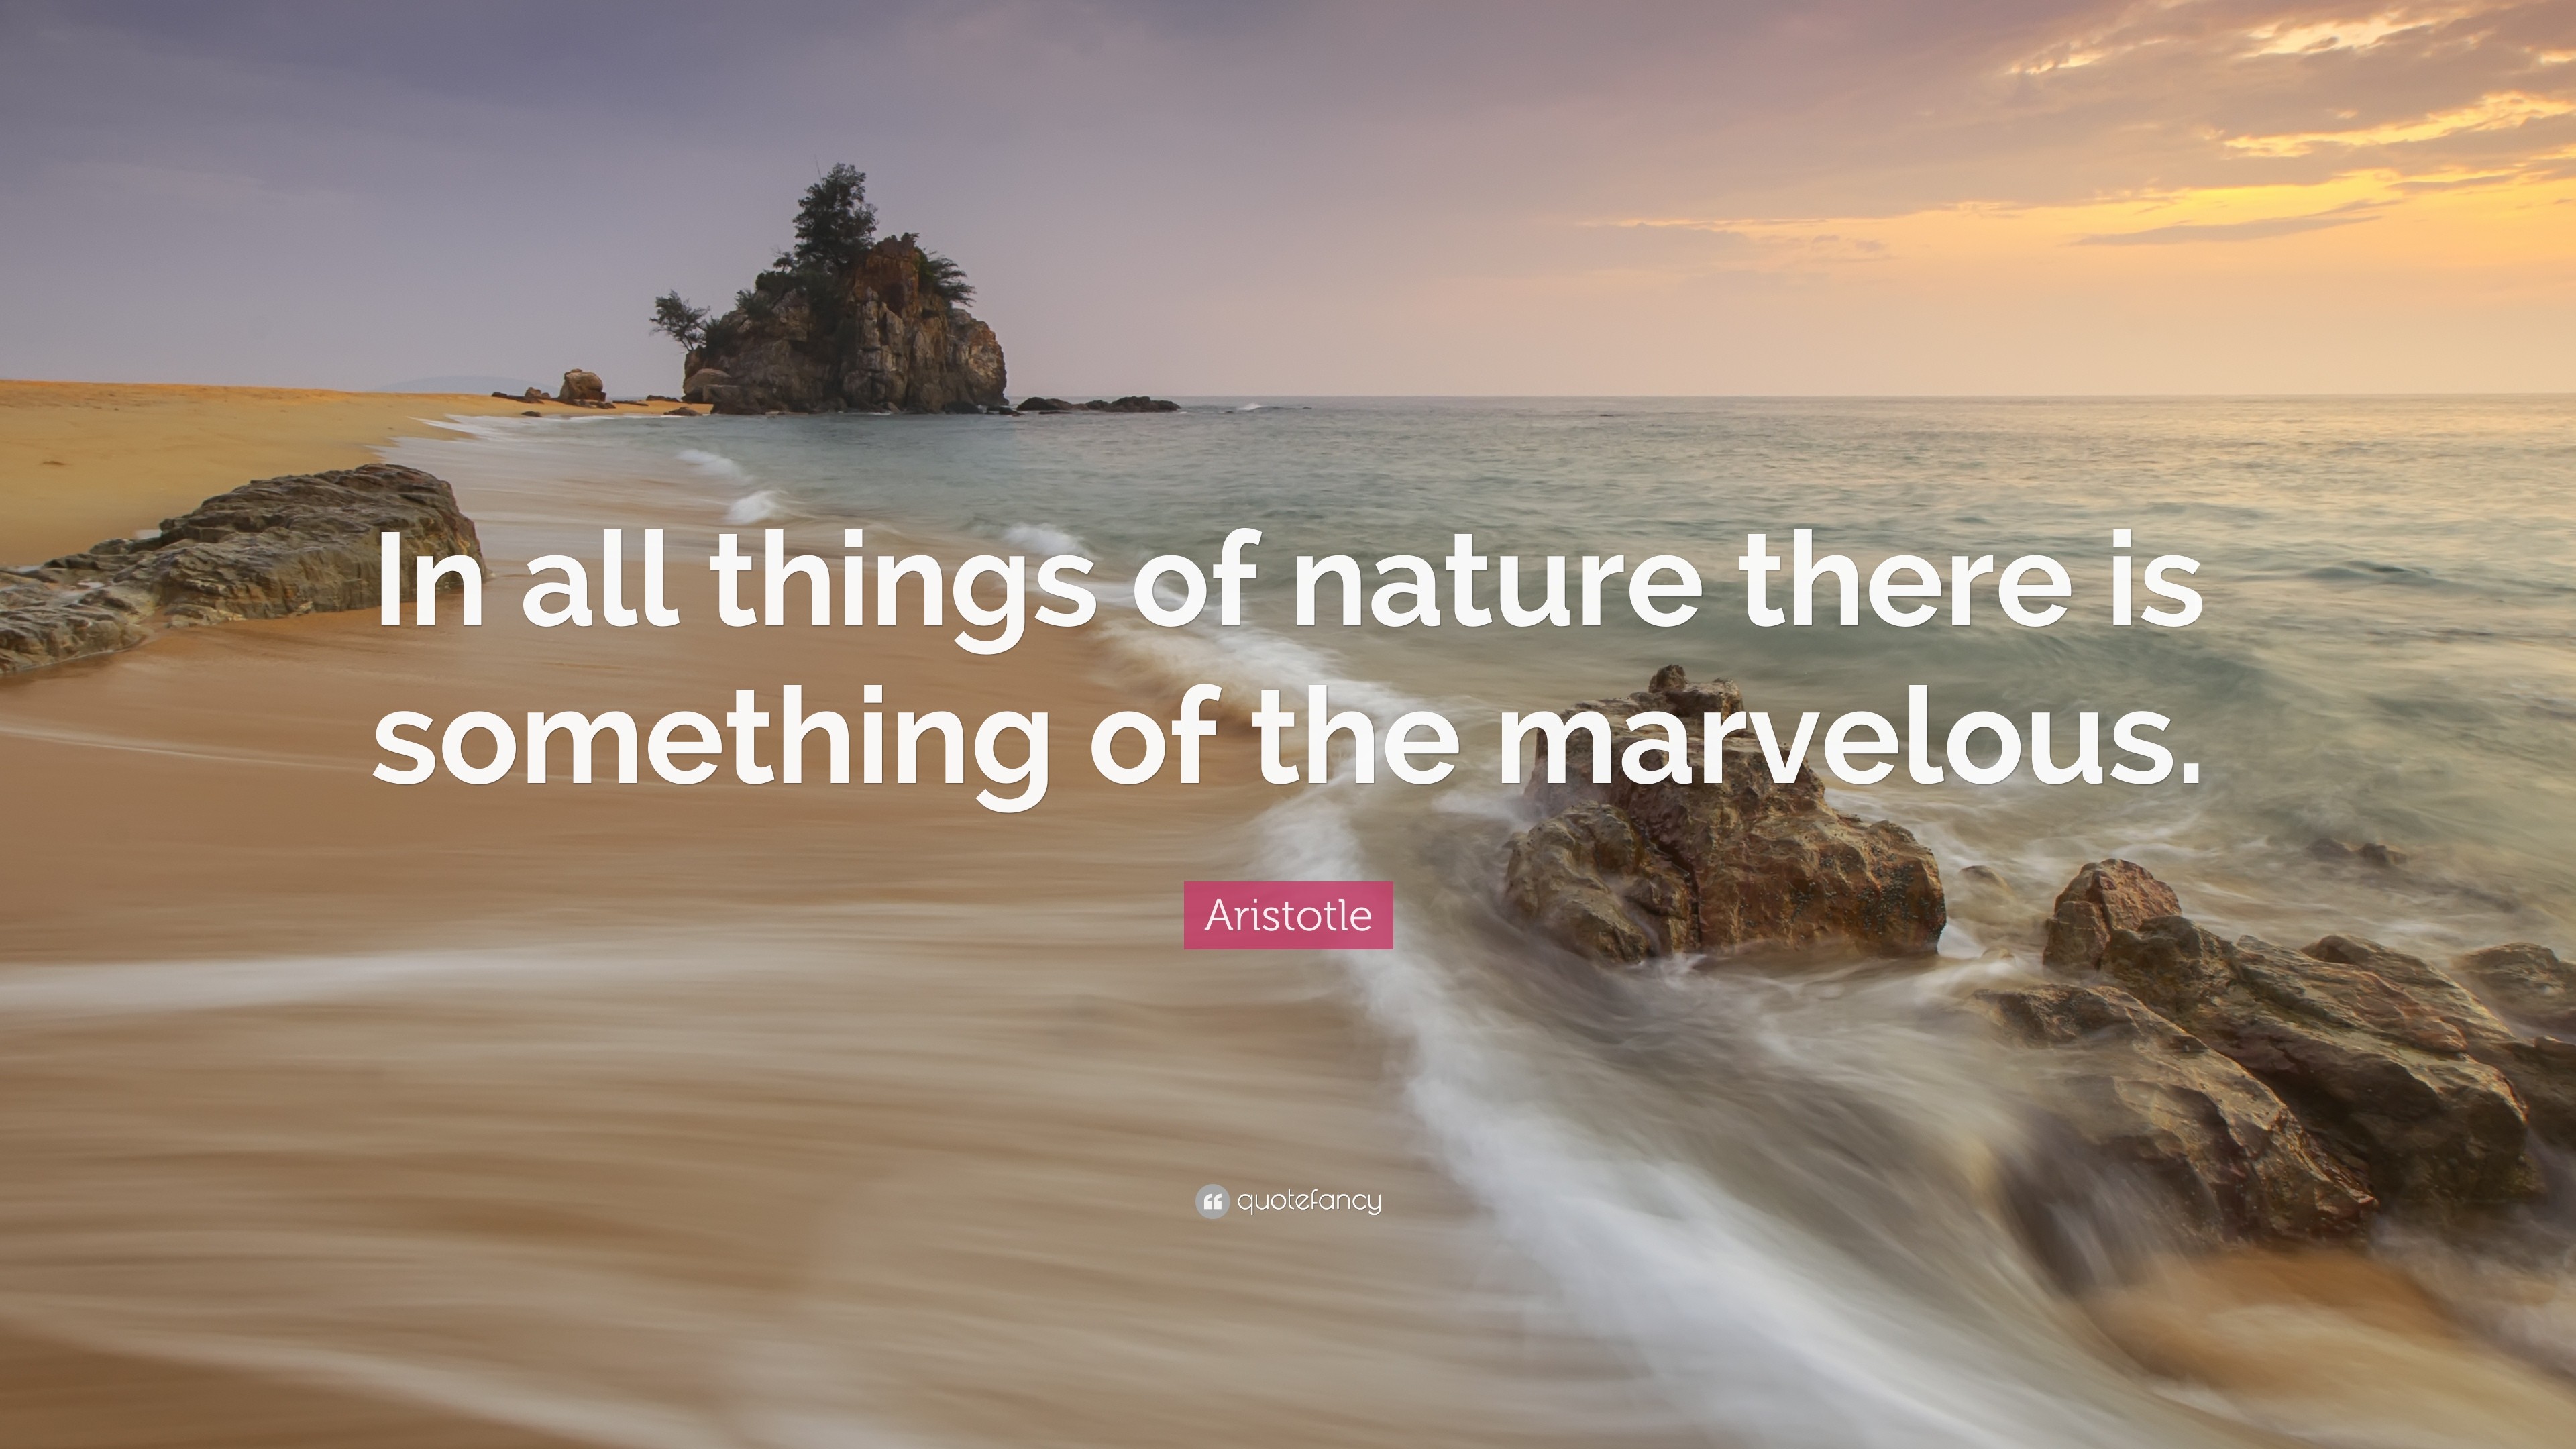 3840x2160 Nature Quotes: “In all things of nature there is something of the marvelous.